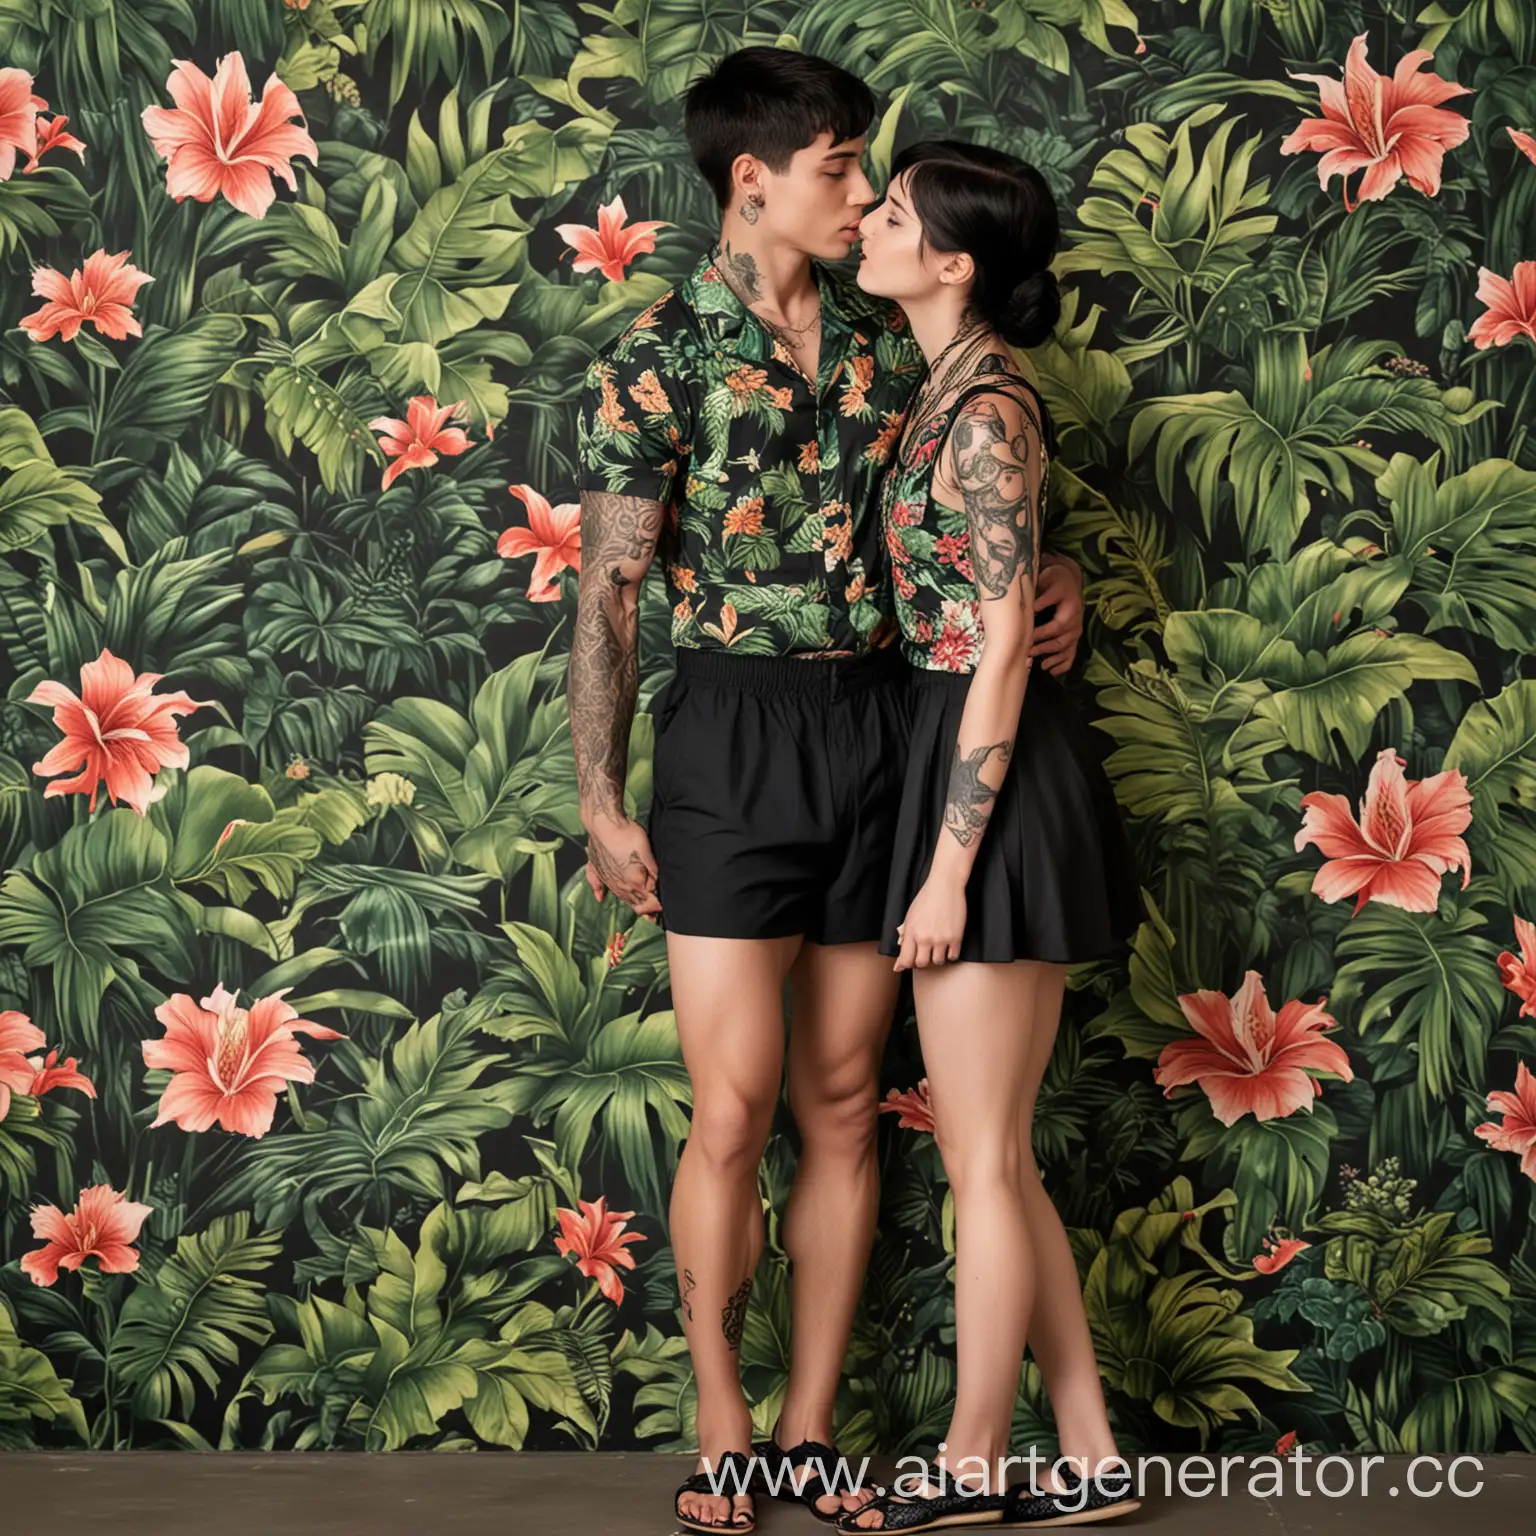 Muscular-Boy-with-Dragon-Tattoo-Embracing-Slim-Girl-in-Floral-Dress